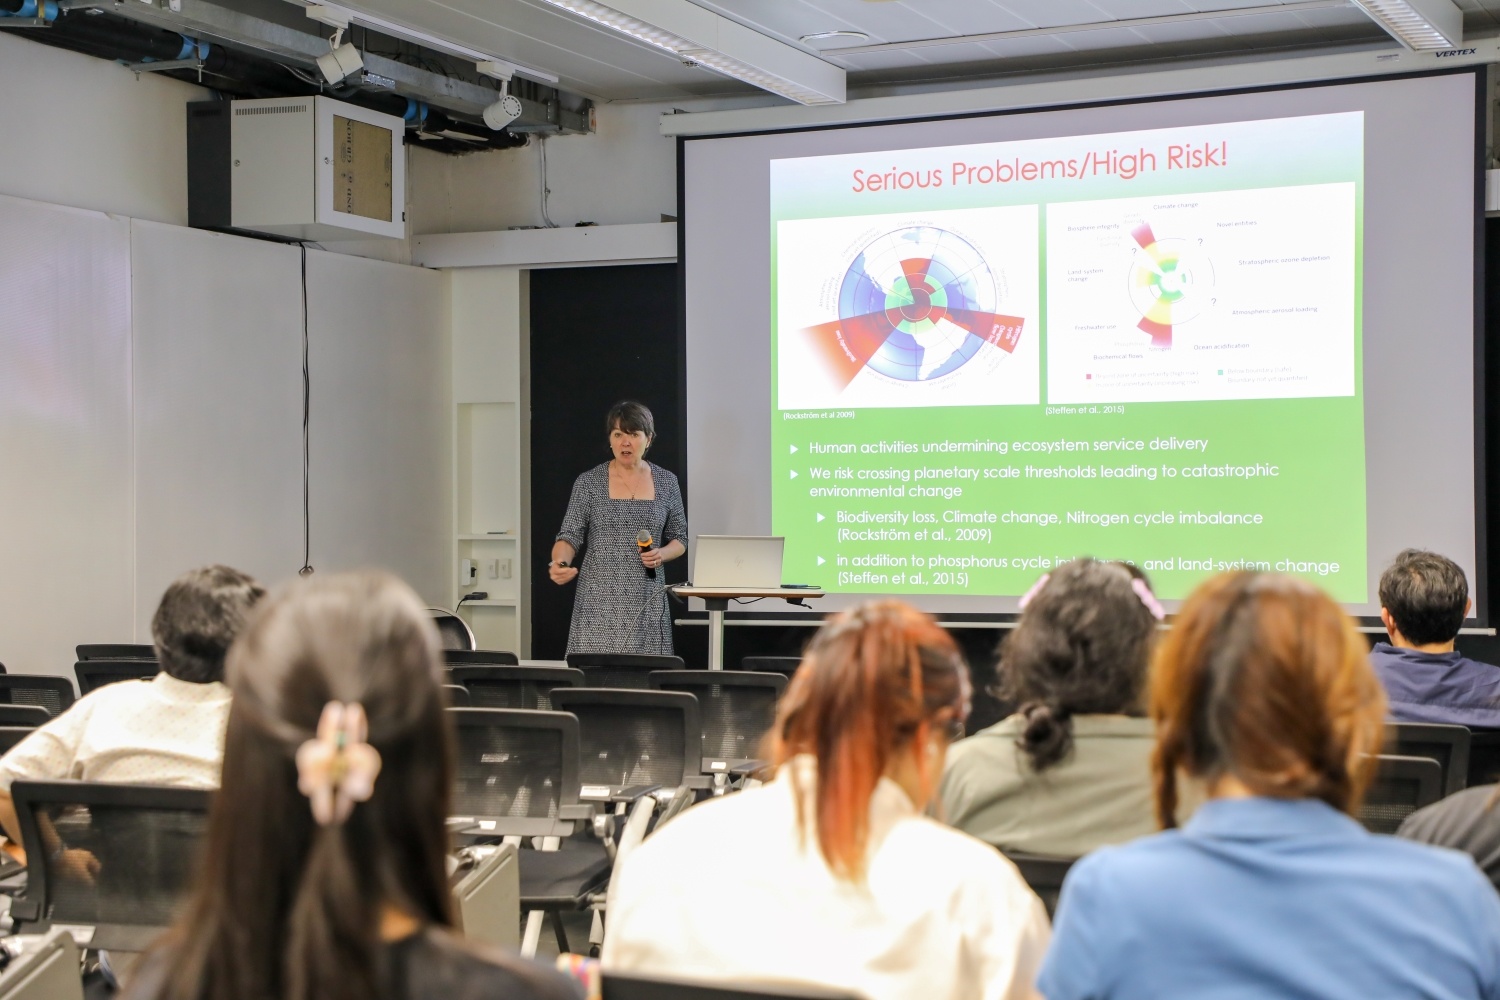 Public lecture: Teaching Evidence-based Design: Successes, Challenges and Next Steps